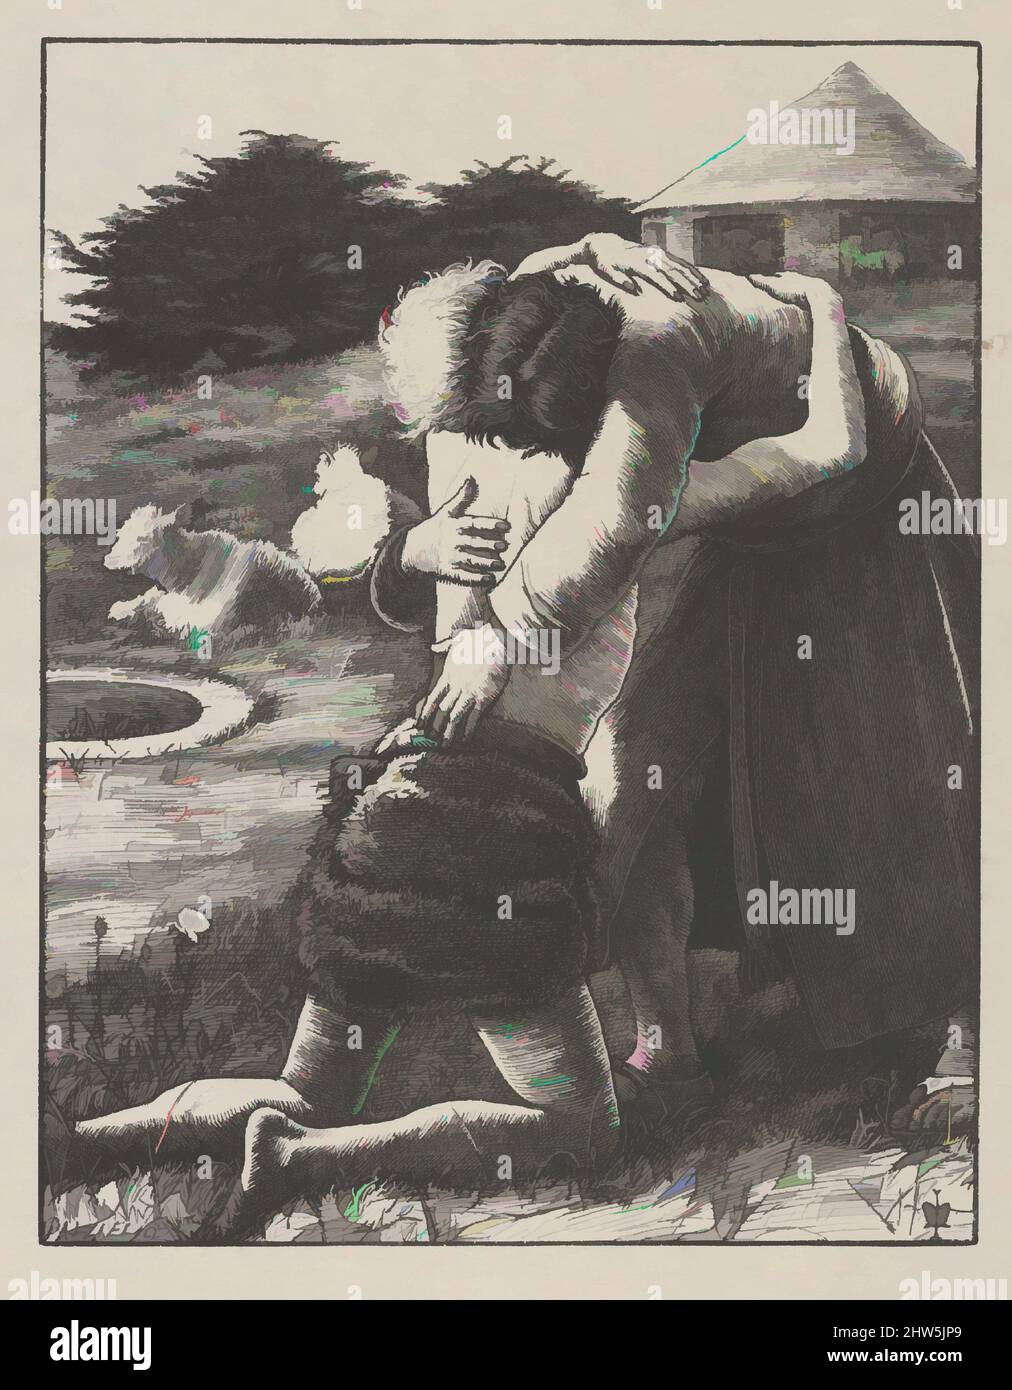 Art inspired by The Prodigal Son (The Parables of Our Lord and Saviour Jesus Christ), 1864, Wood engraving; proof on India paper, image: 5 1/2 x 4 5/16 in. (13.9 x 10.9 cm), Prints, After Sir John Everett Millais (British, Southampton 1829–1896 London), It took Millais seven years to, Classic works modernized by Artotop with a splash of modernity. Shapes, color and value, eye-catching visual impact on art. Emotions through freedom of artworks in a contemporary way. A timeless message pursuing a wildly creative new direction. Artists turning to the digital medium and creating the Artotop NFT Stock Photo